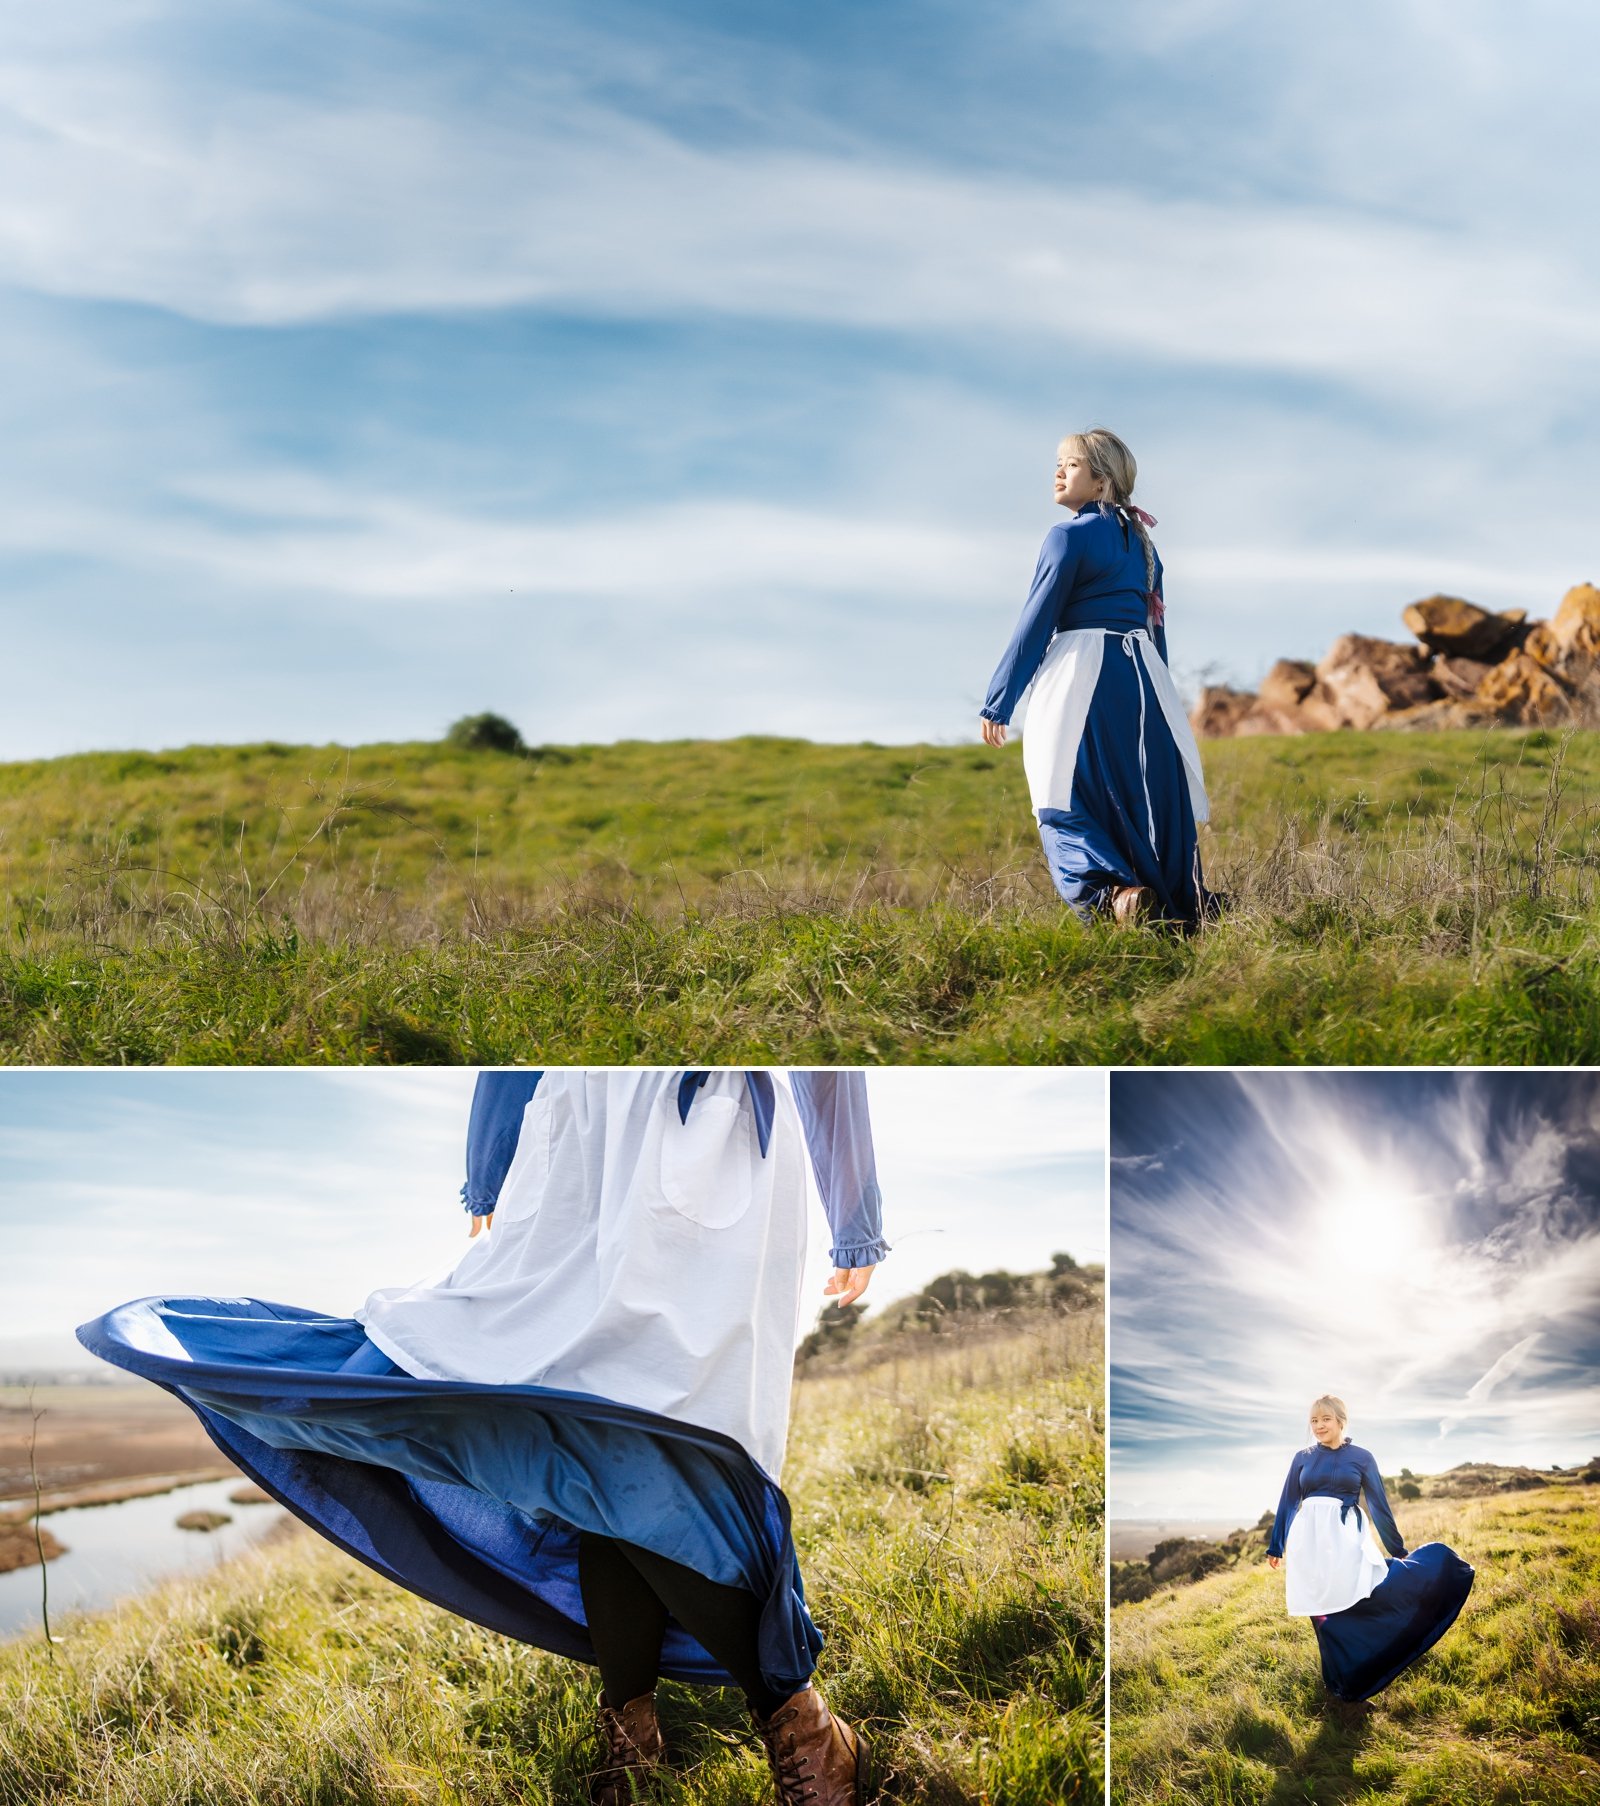 howl's moving castle sophie cosplay photoshoot bay area cosplay photographer 6.jpg